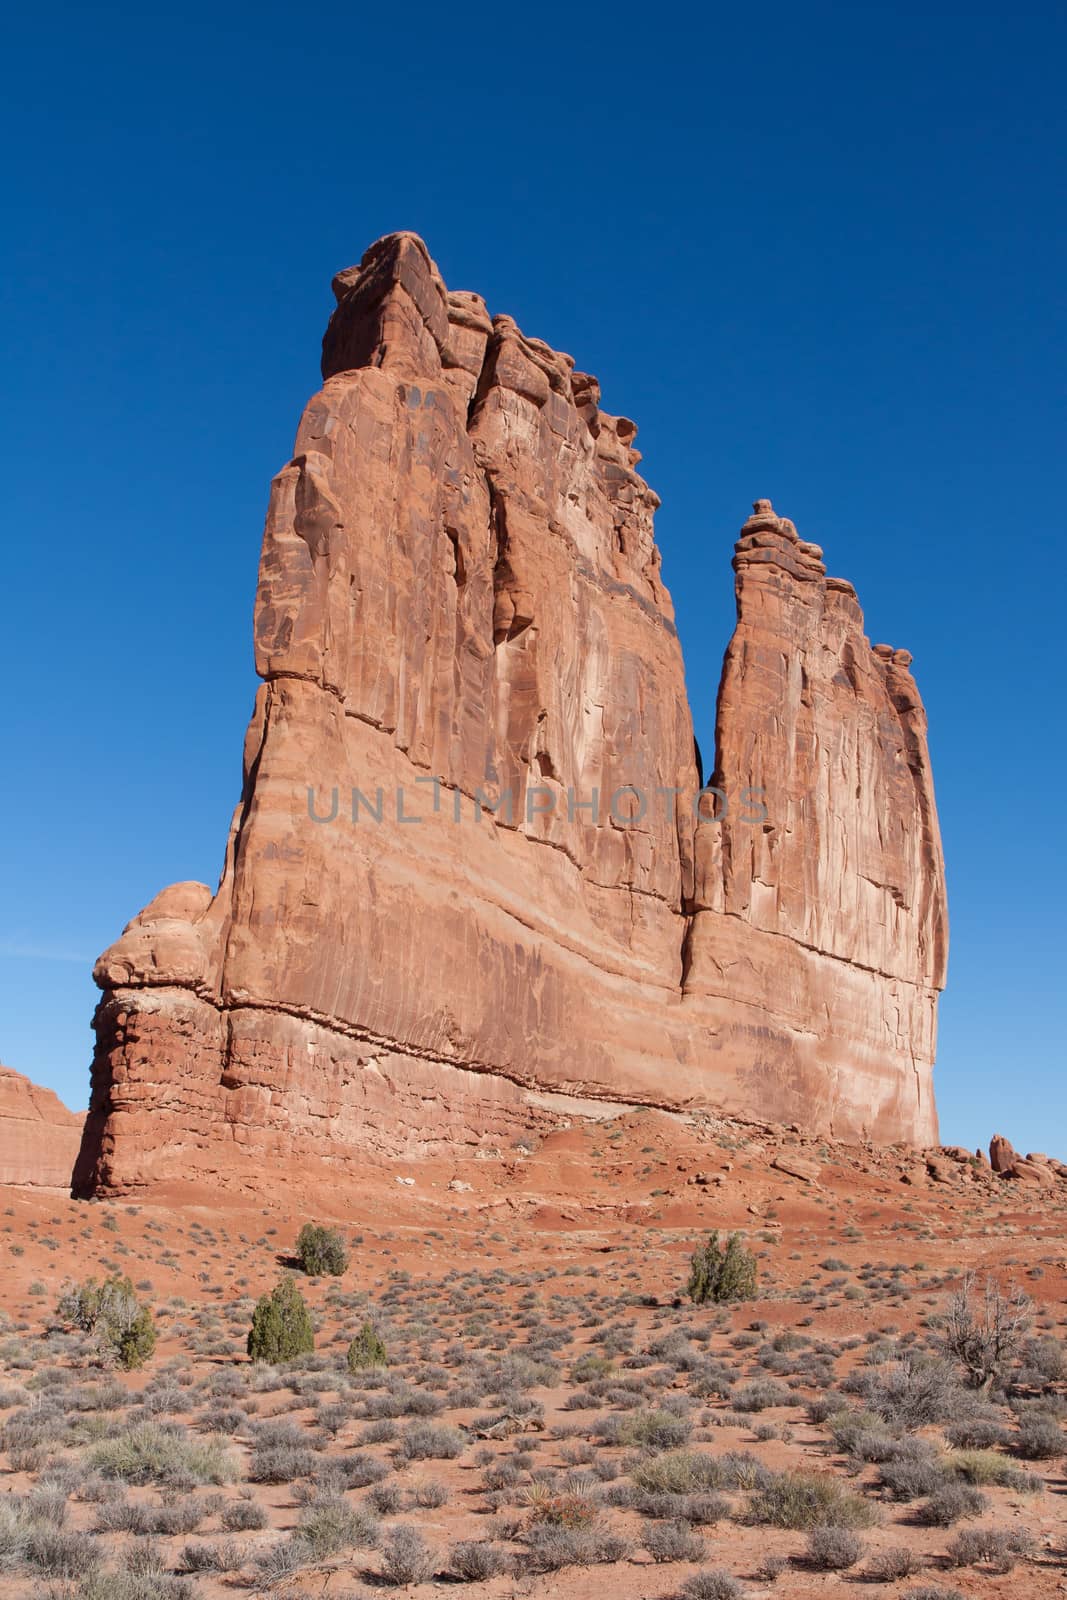 This incredible straight sided formation makes the visitor feel insignificant as they drive by.